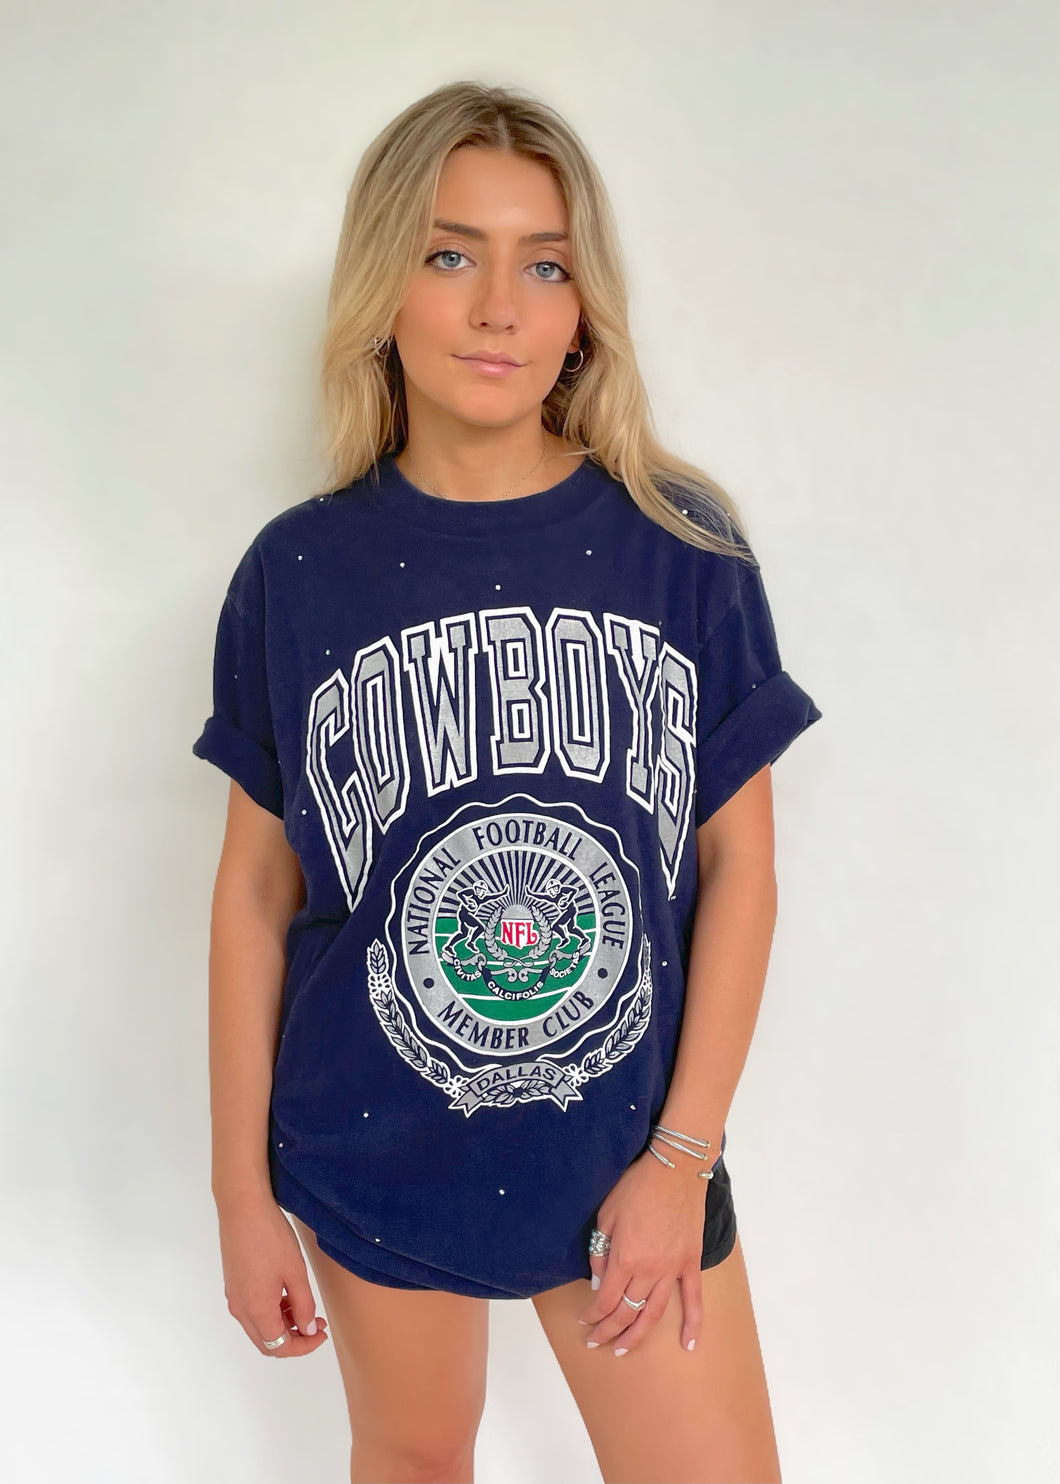 Dallas Cowboys, NFL One of a KIND Vintage Tee with Overall Crystal Design